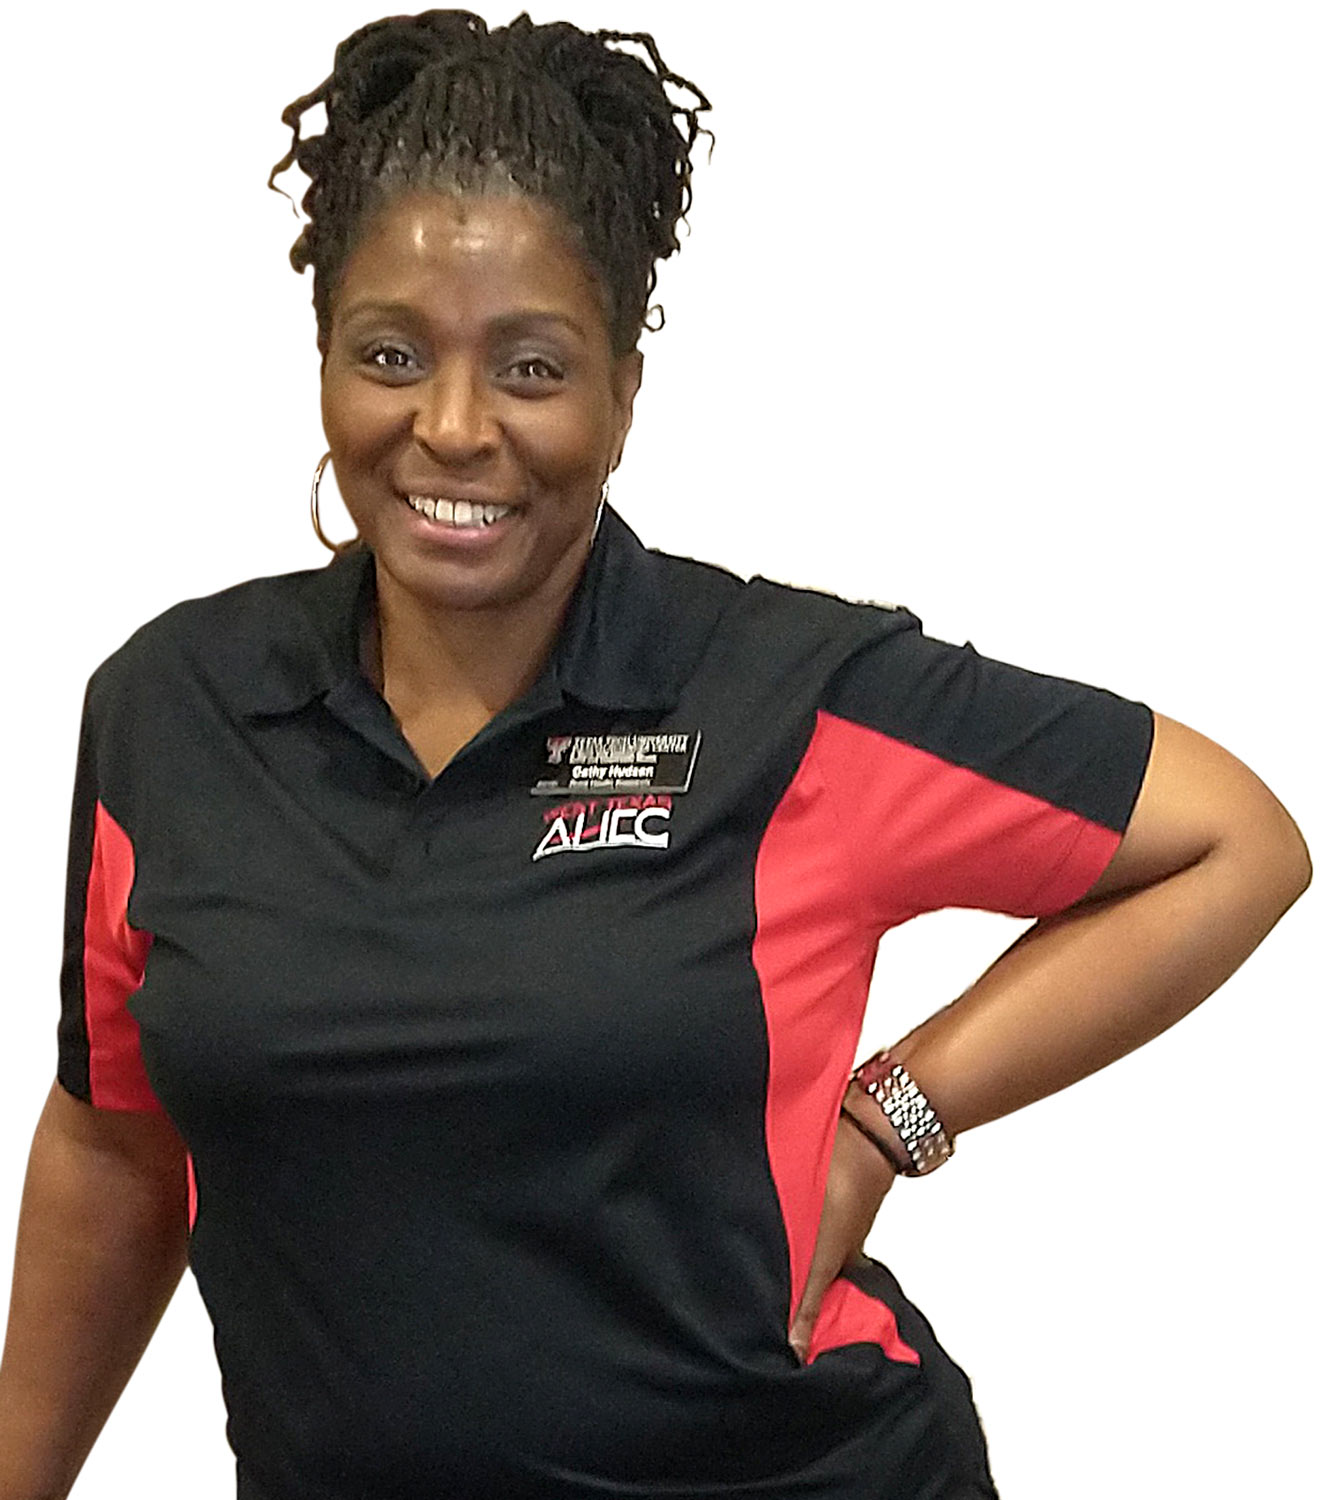 a woman wearing a Texas Tech shirt and name tag smiles with her hand on her hip